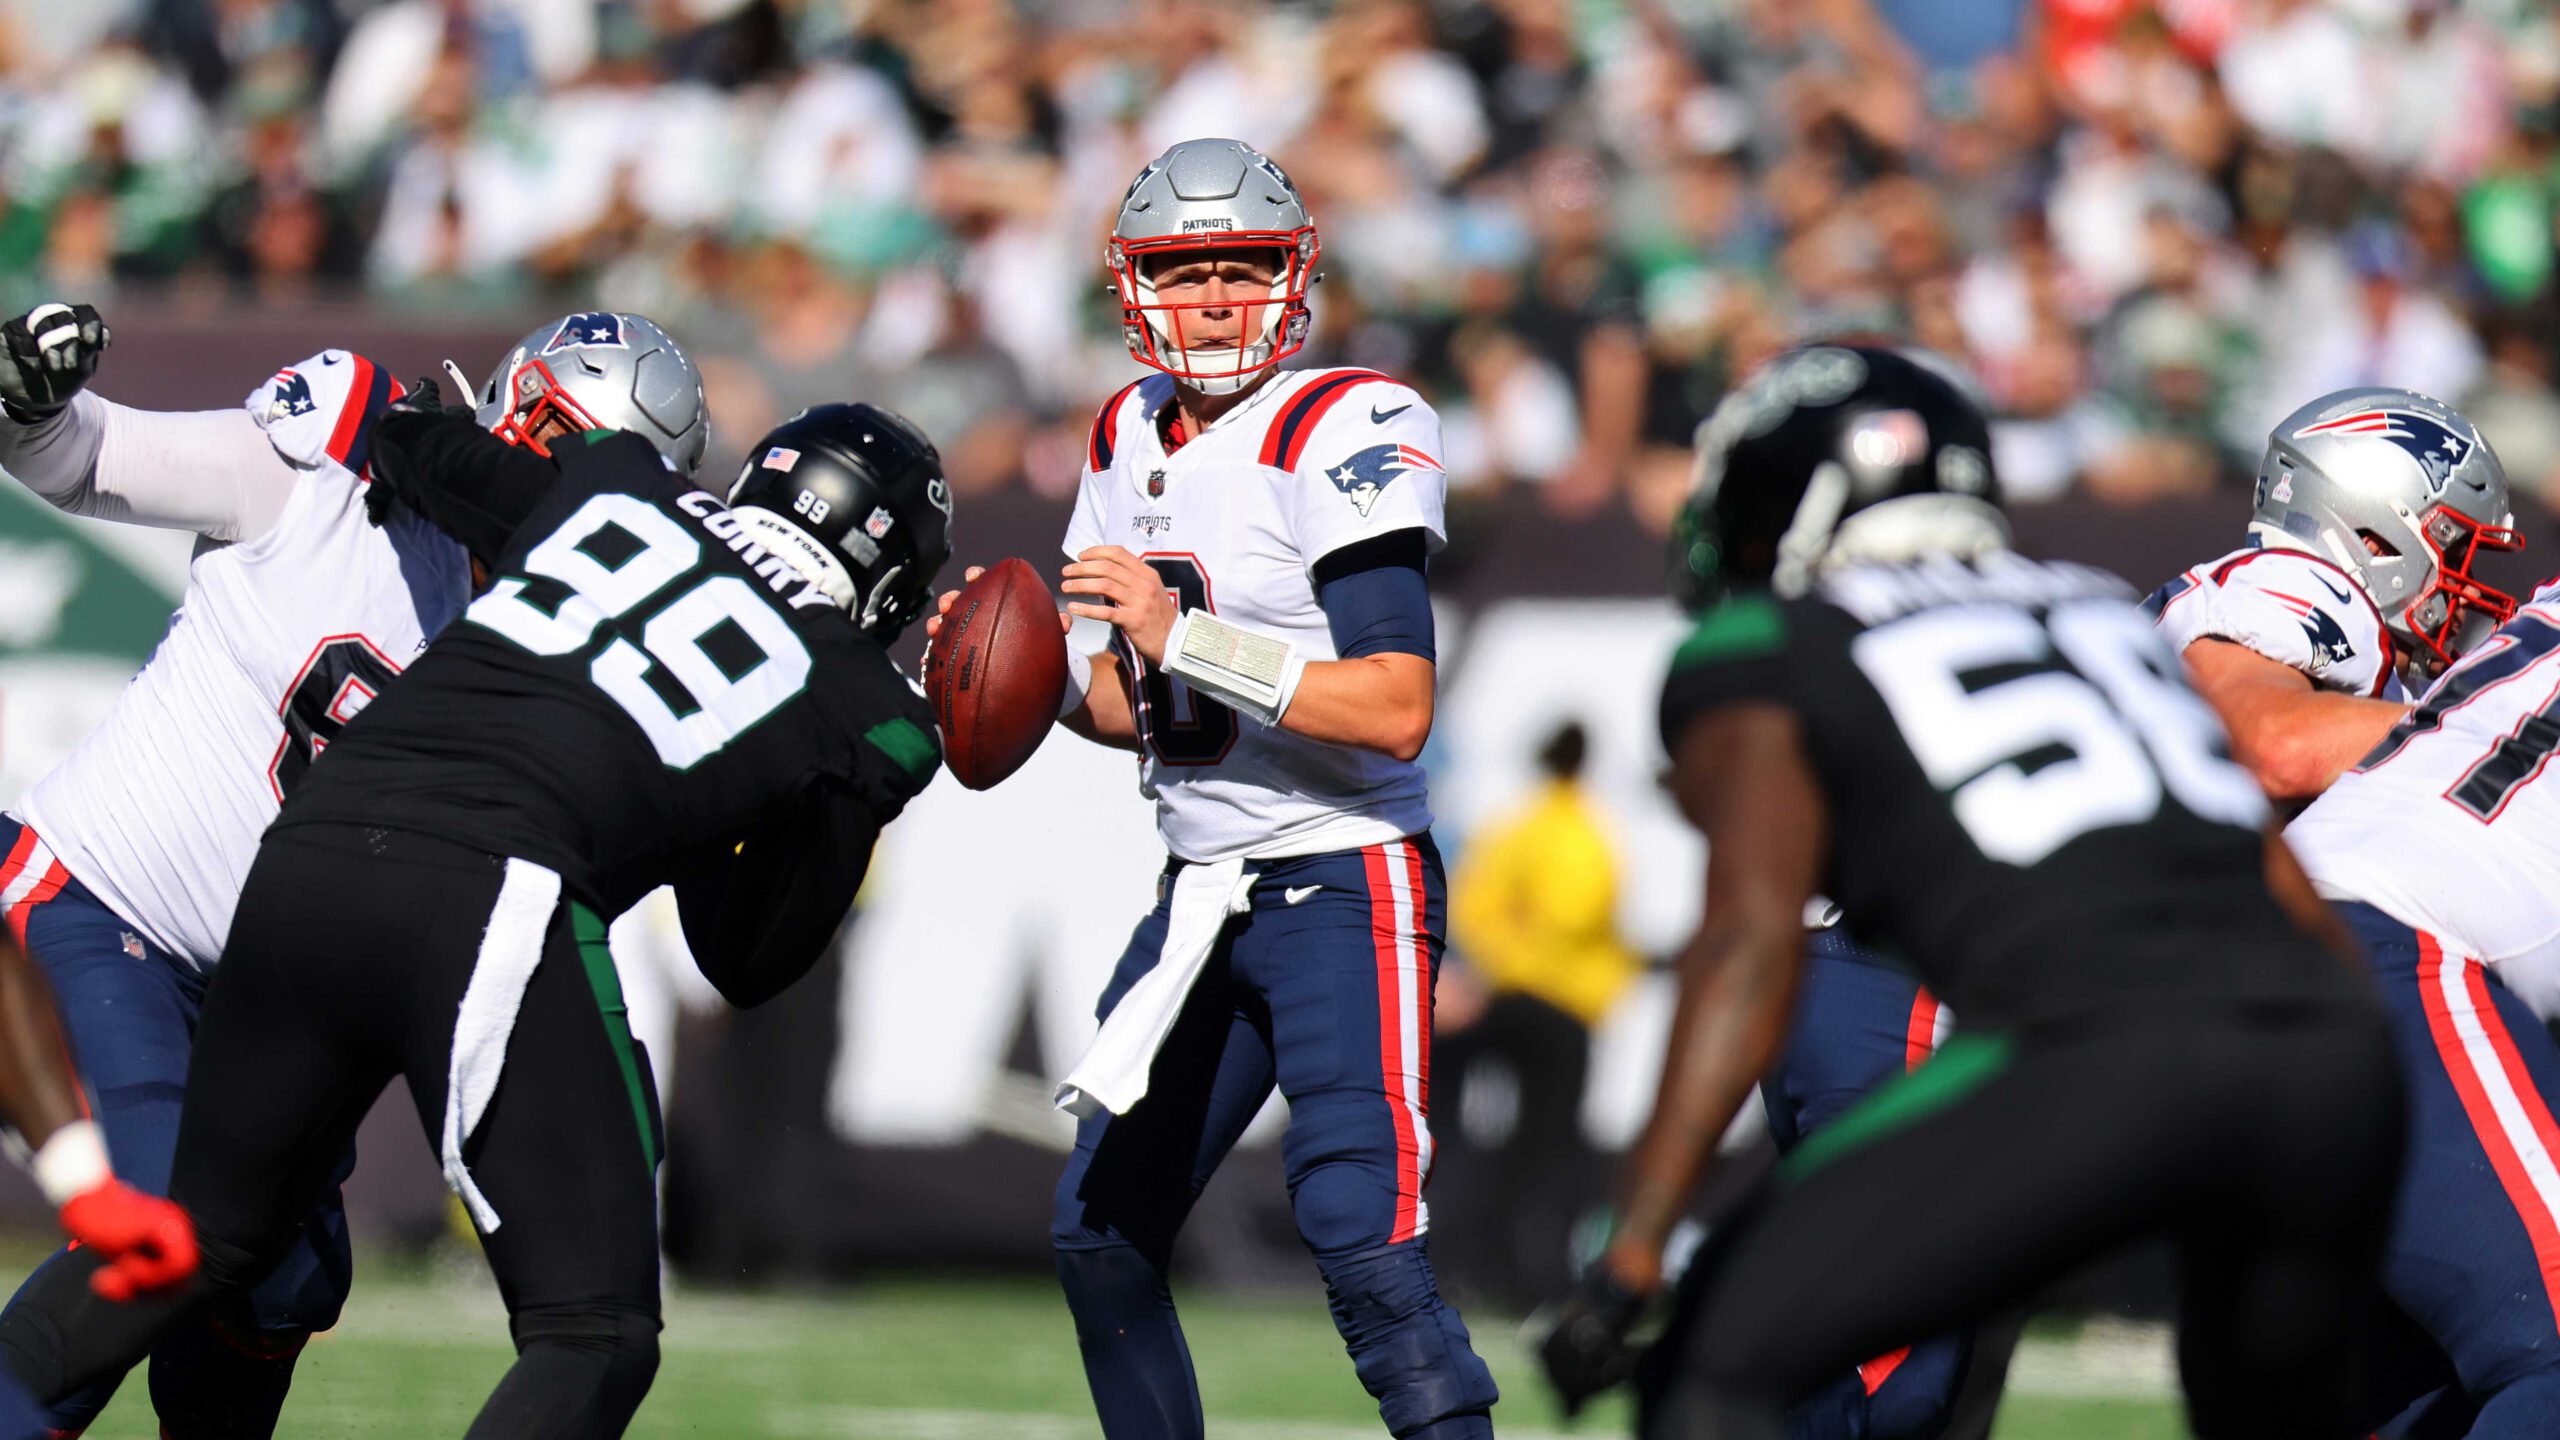 Patriots vs. Jets Week 11 – Players to Watch, Betting Preview, and